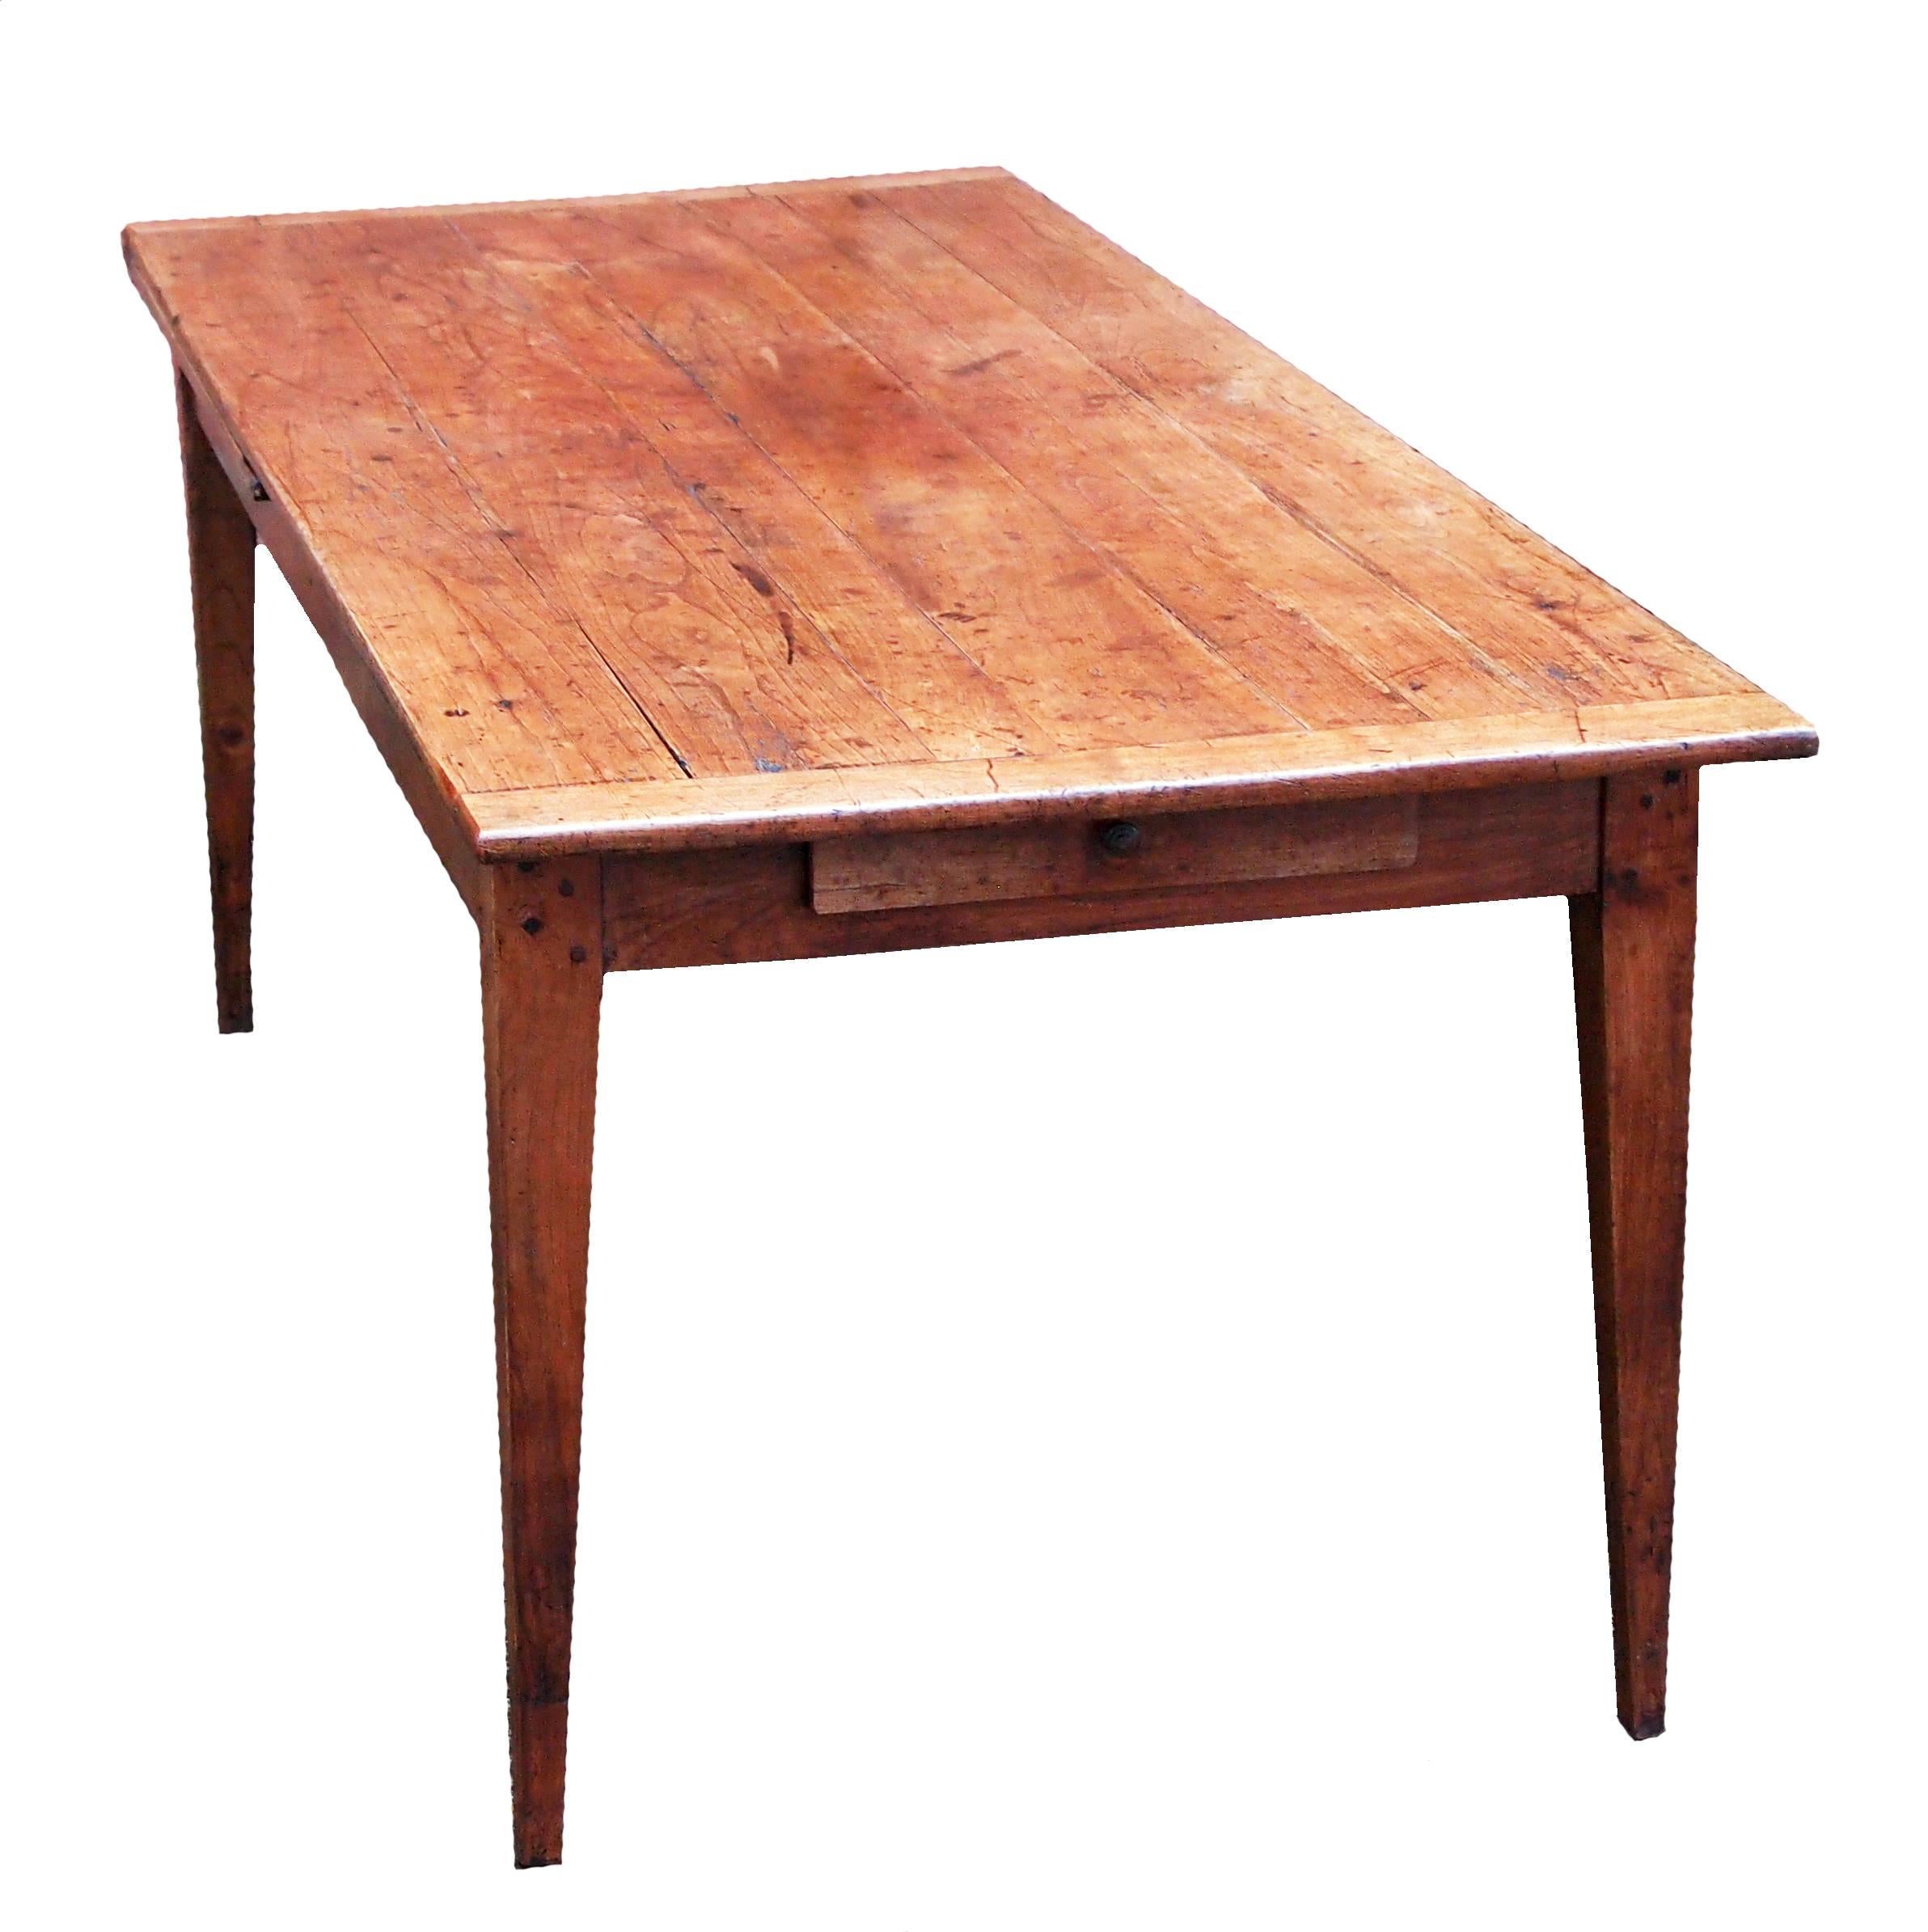 A very attractive mid-19th century french cherrywood extending farmhouse dining table
having superbly figured plank top with cleated ends, frieze drawer to one end and
draw leaf extension to other raised on elegant square tapered